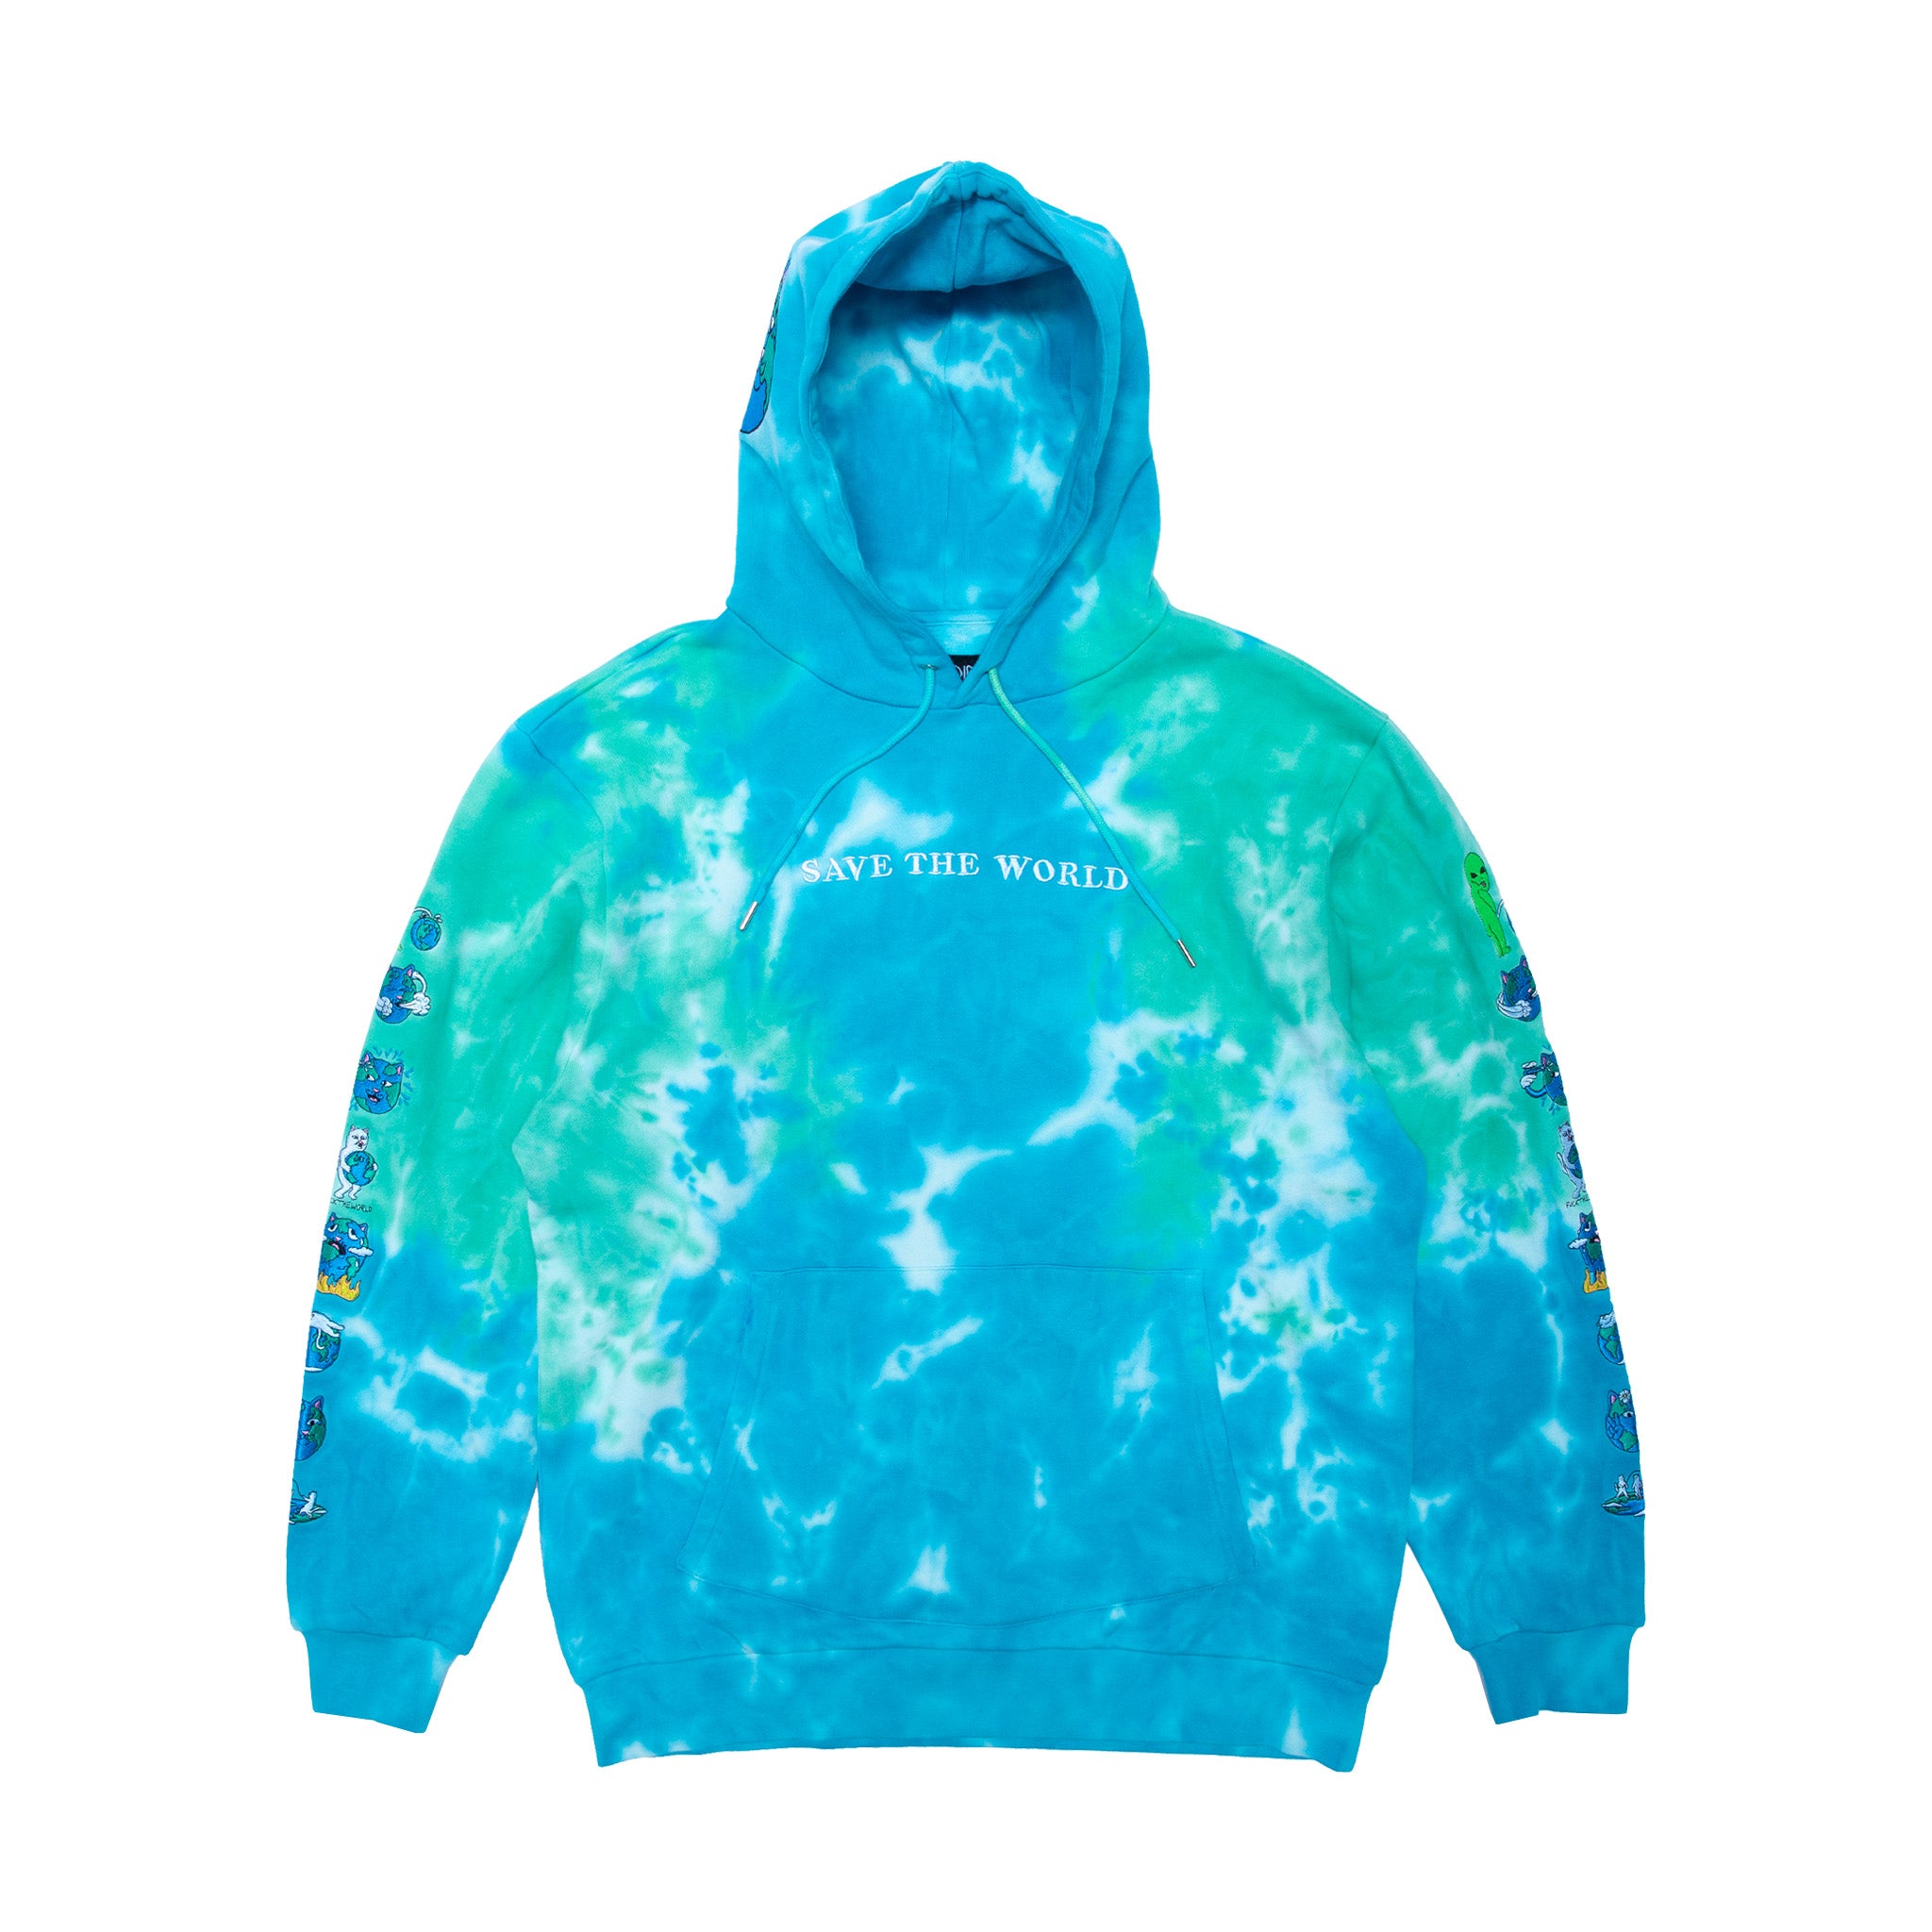 Save the World Embroidered Hoodie (Aqua/Green Tie Dye)